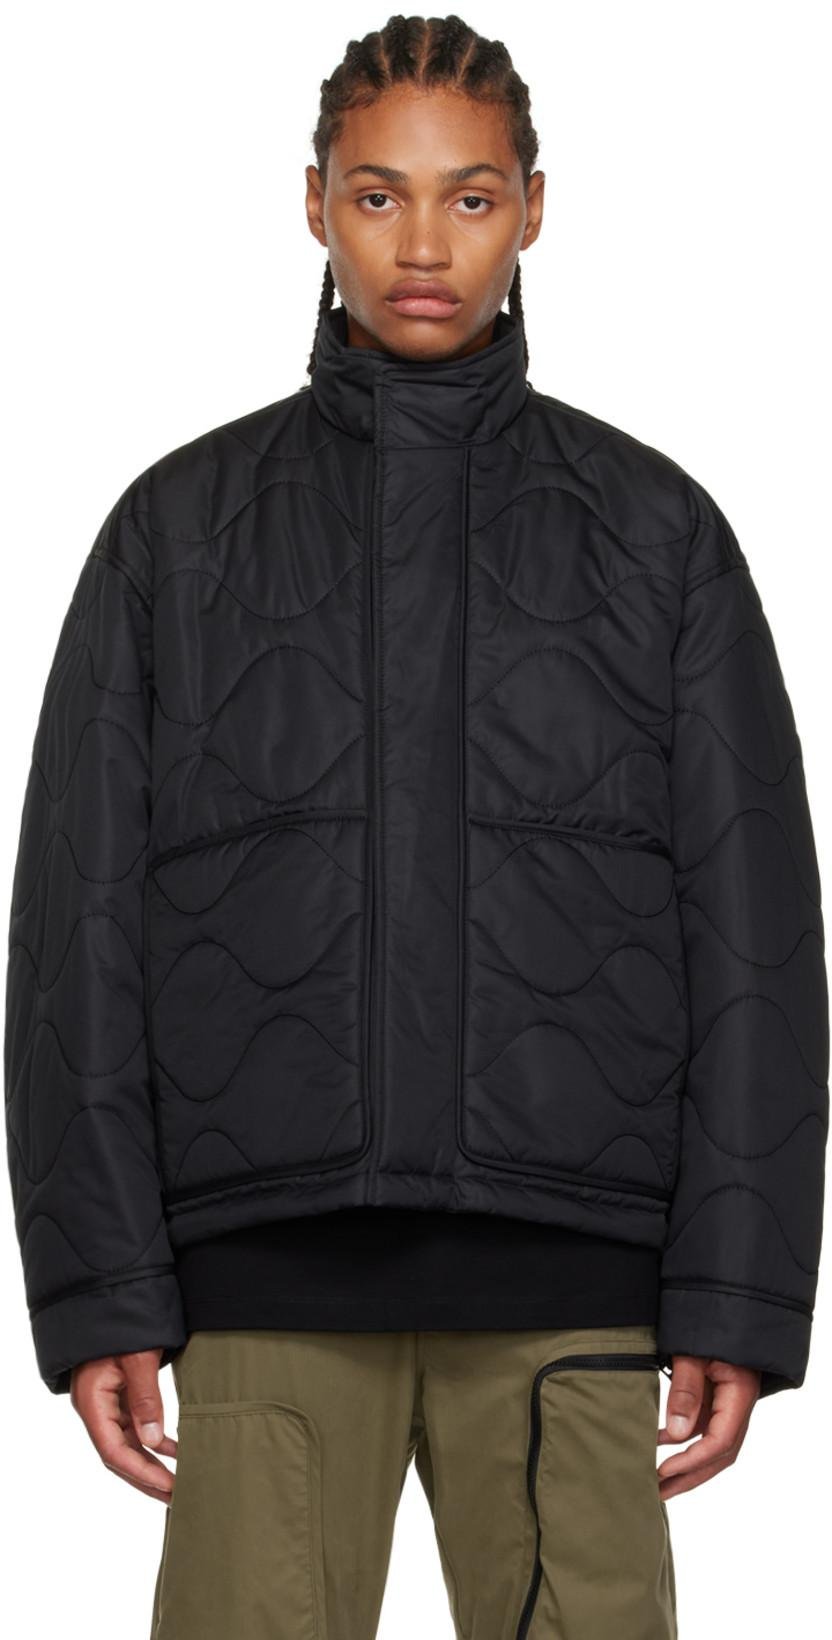 Black Quilted Jacket by WOOYOUNGMI | jellibeans